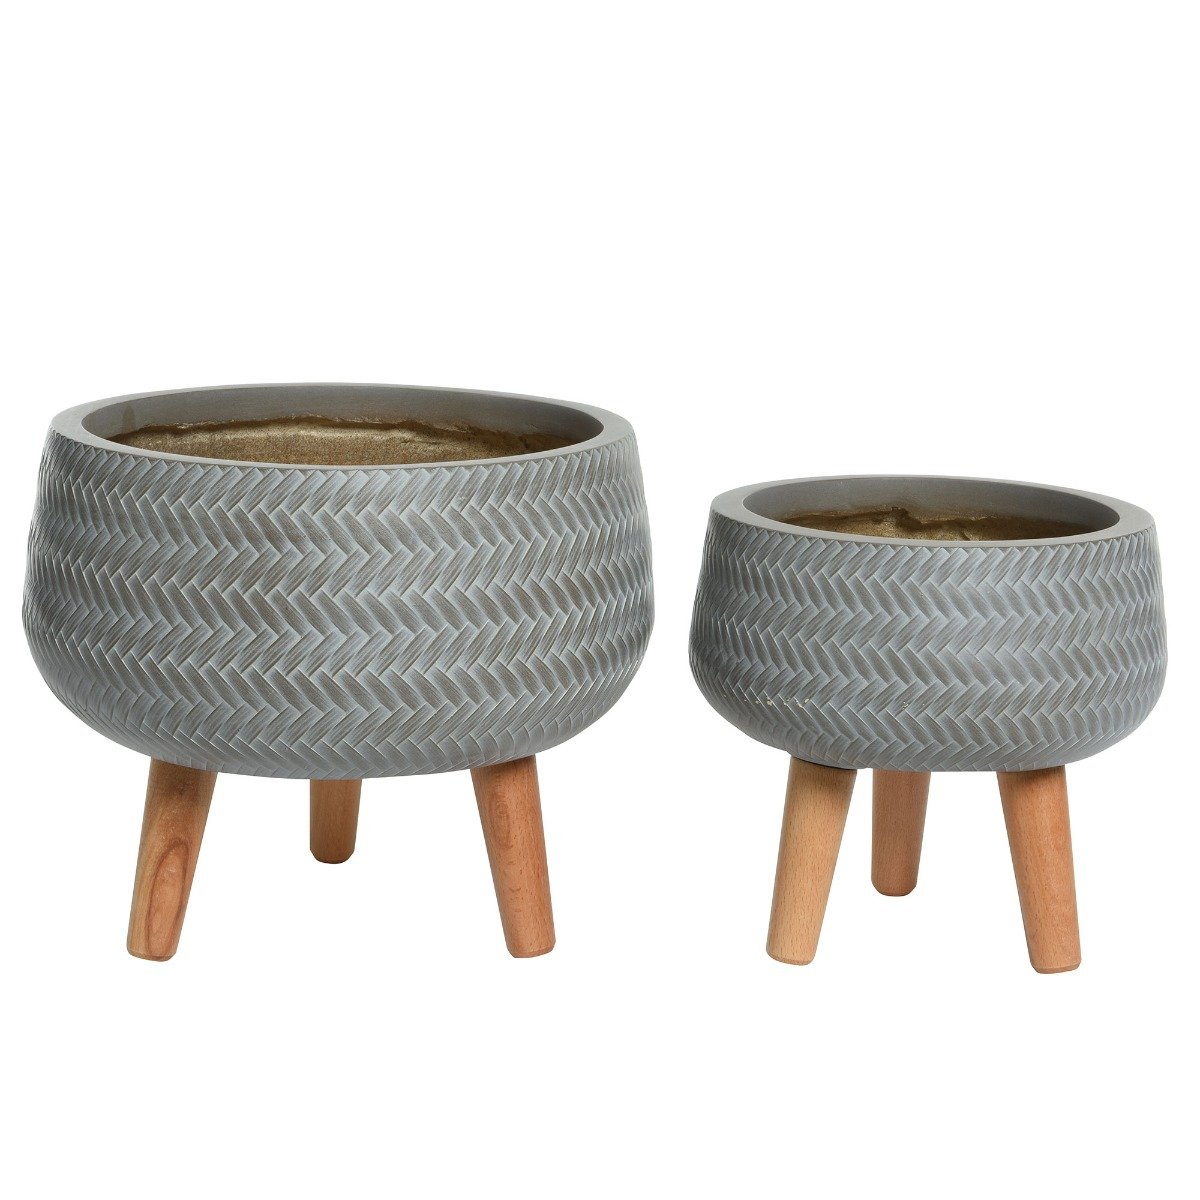 Round Woven Effect Clay Plant Pot Set, Grey | Barker & Stonehouse